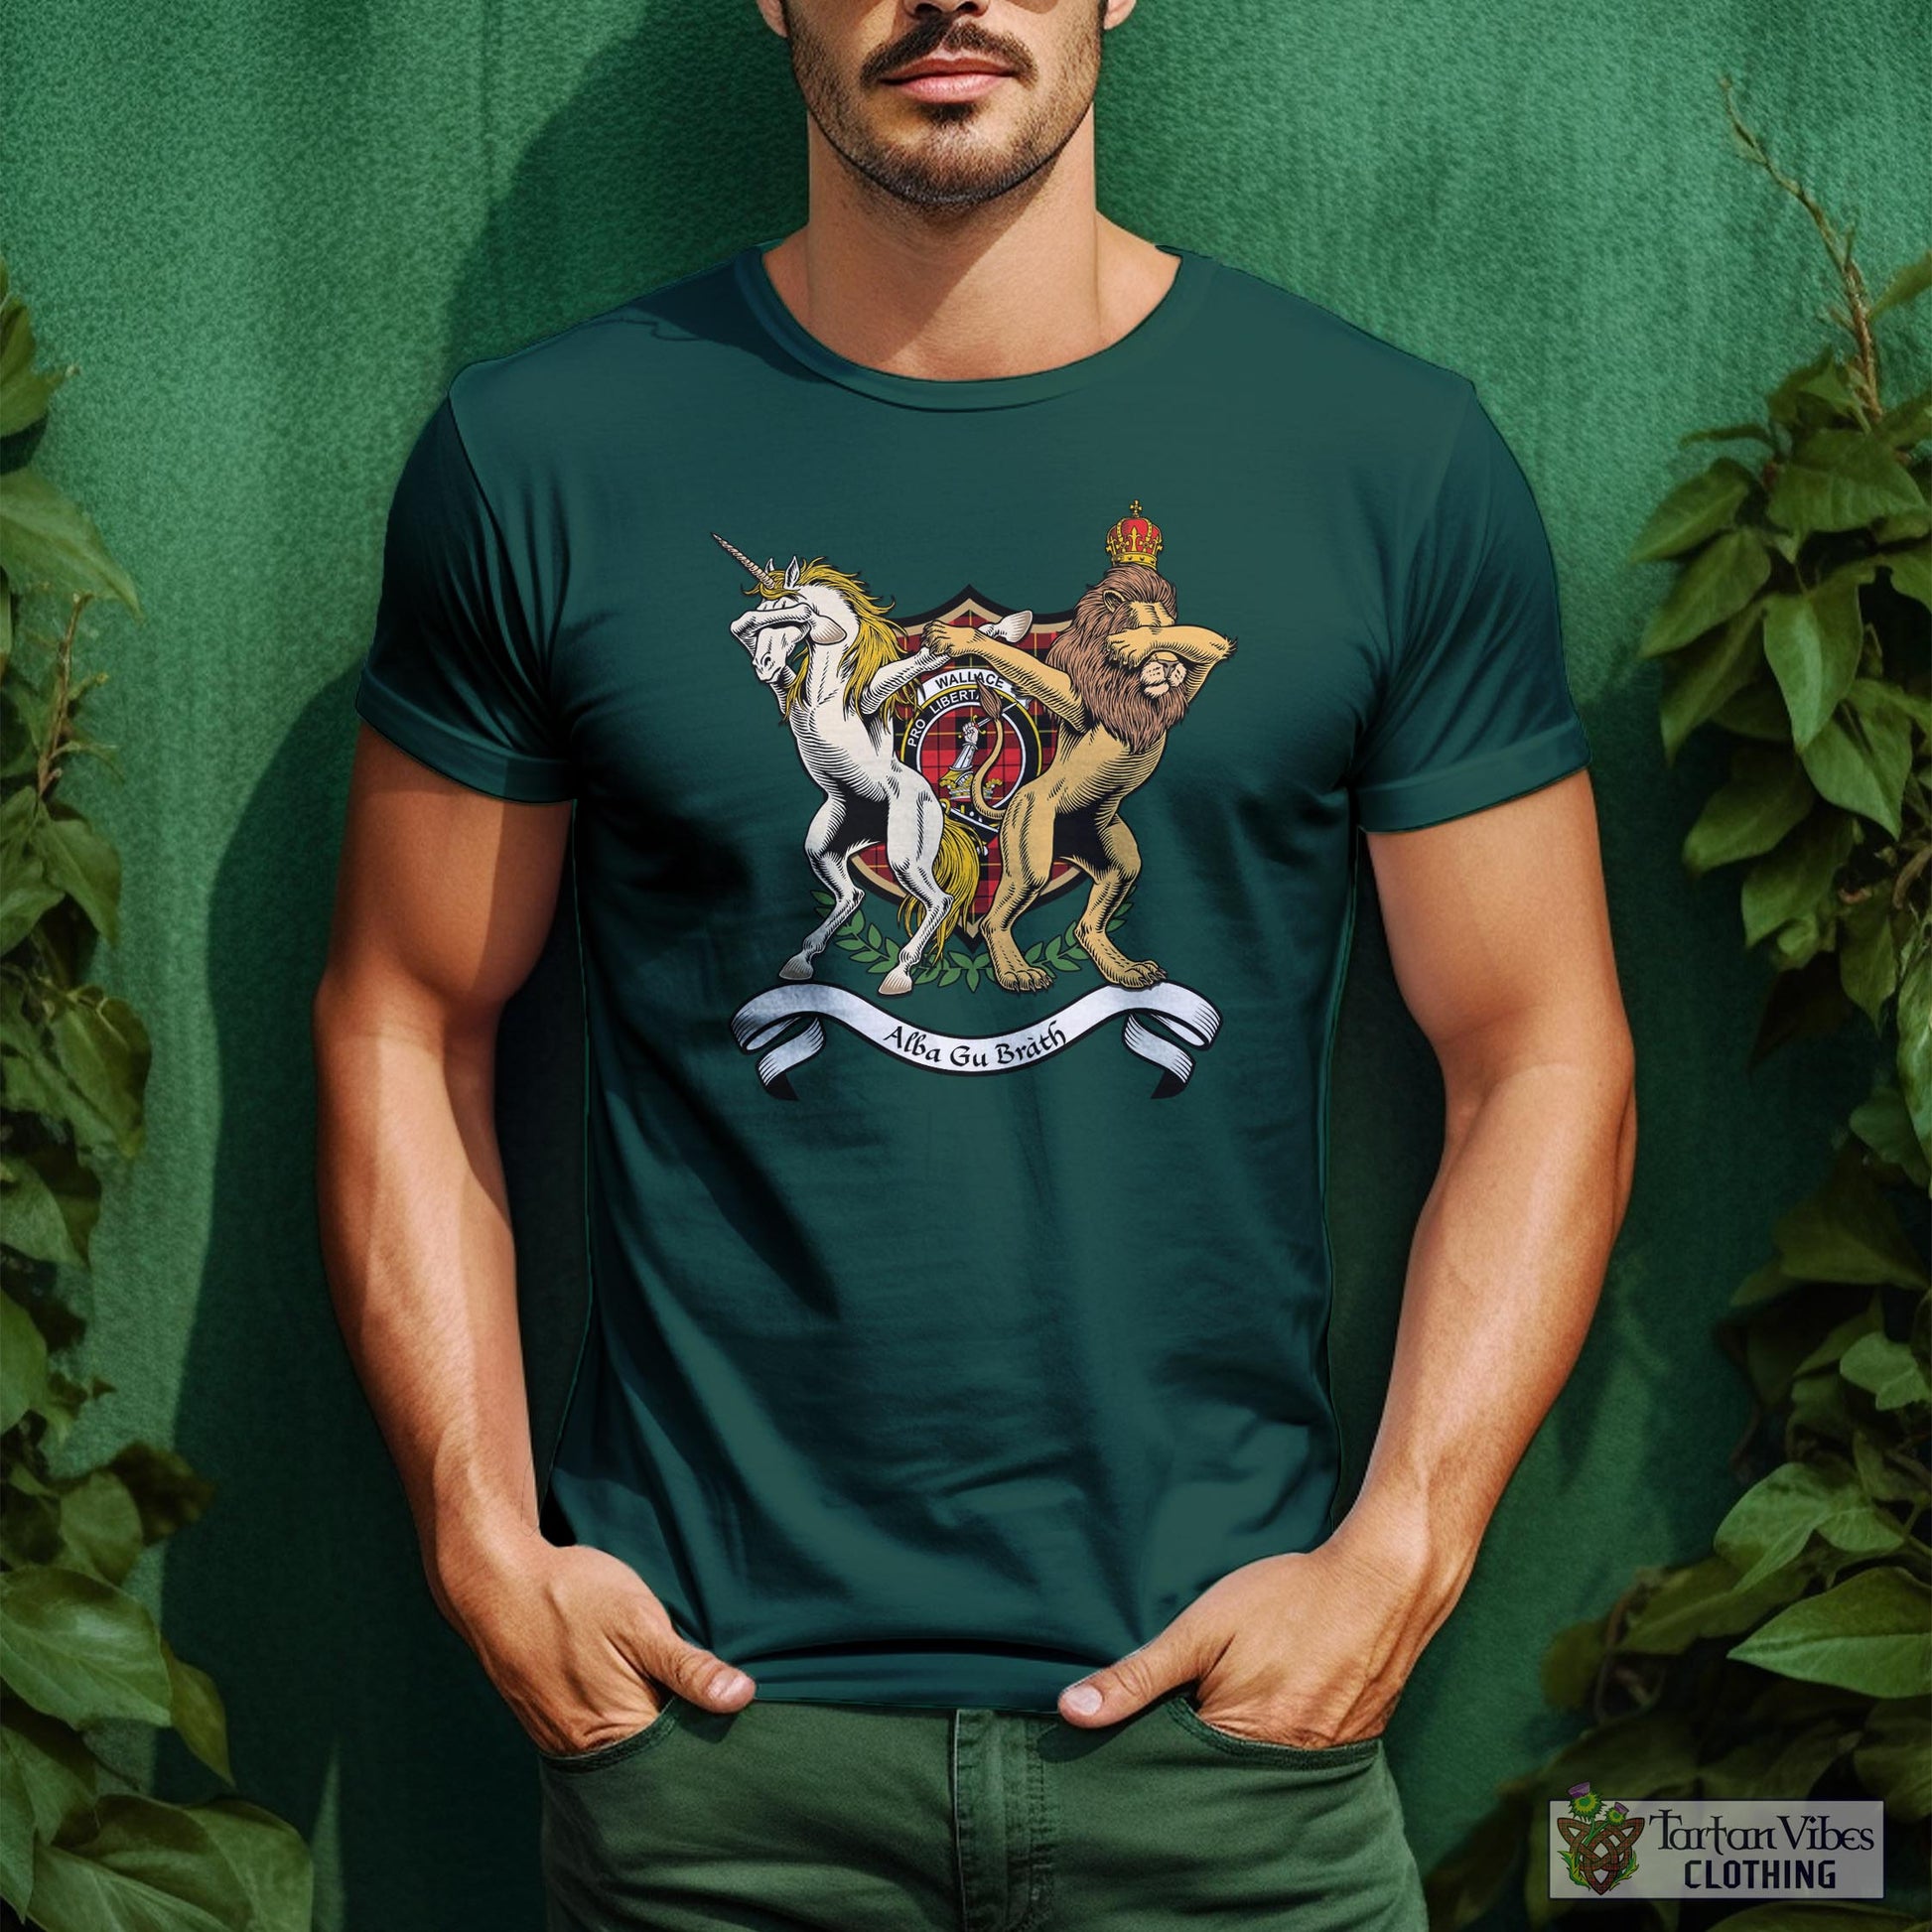 Tartan Vibes Clothing Wallace Hunting Red Family Crest Cotton Men's T-Shirt with Scotland Royal Coat Of Arm Funny Style